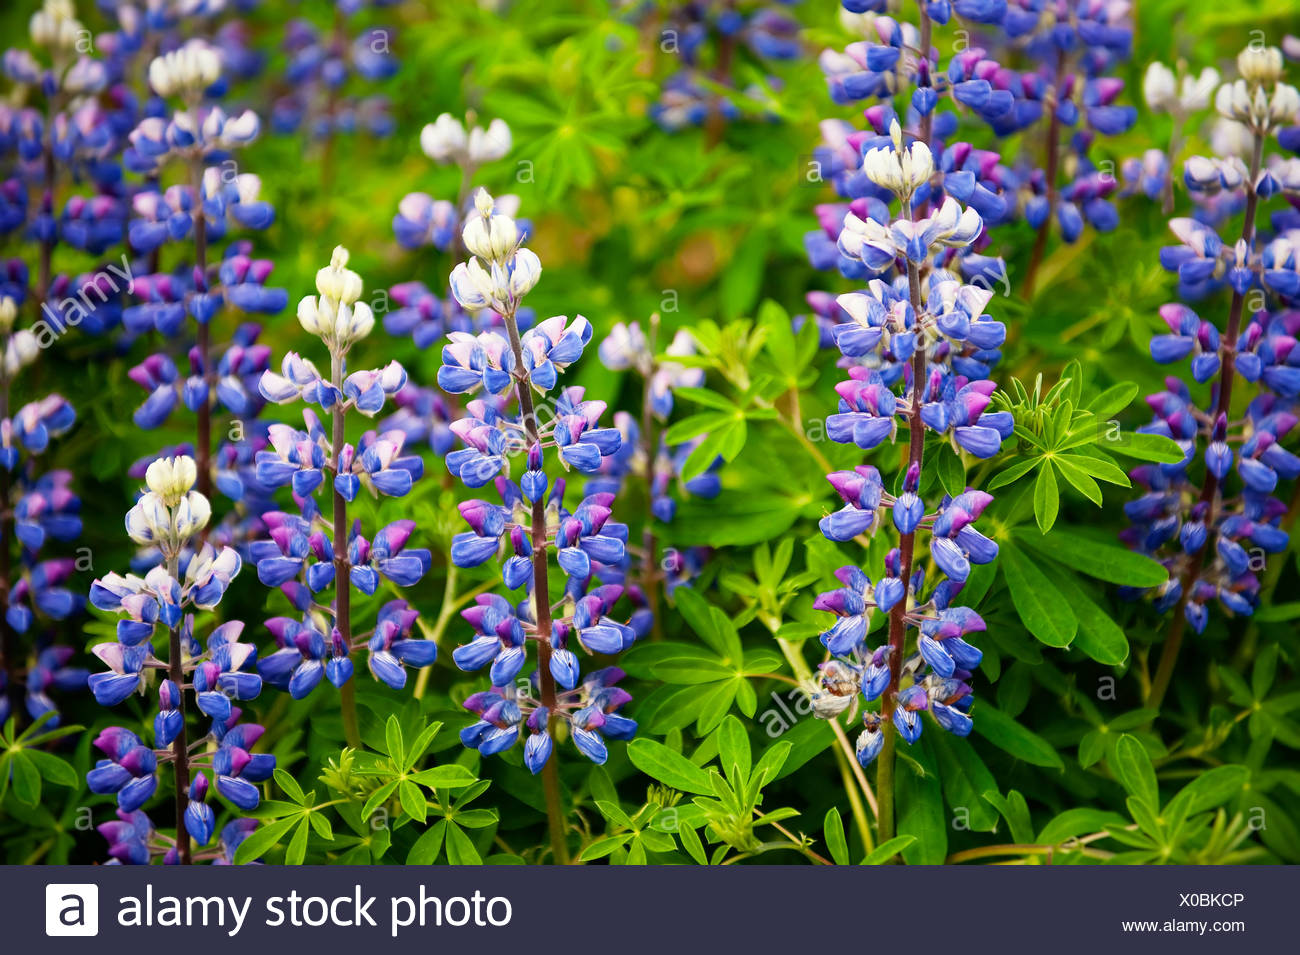 Lupine High Resolution Stock Photography and Images - Alamy